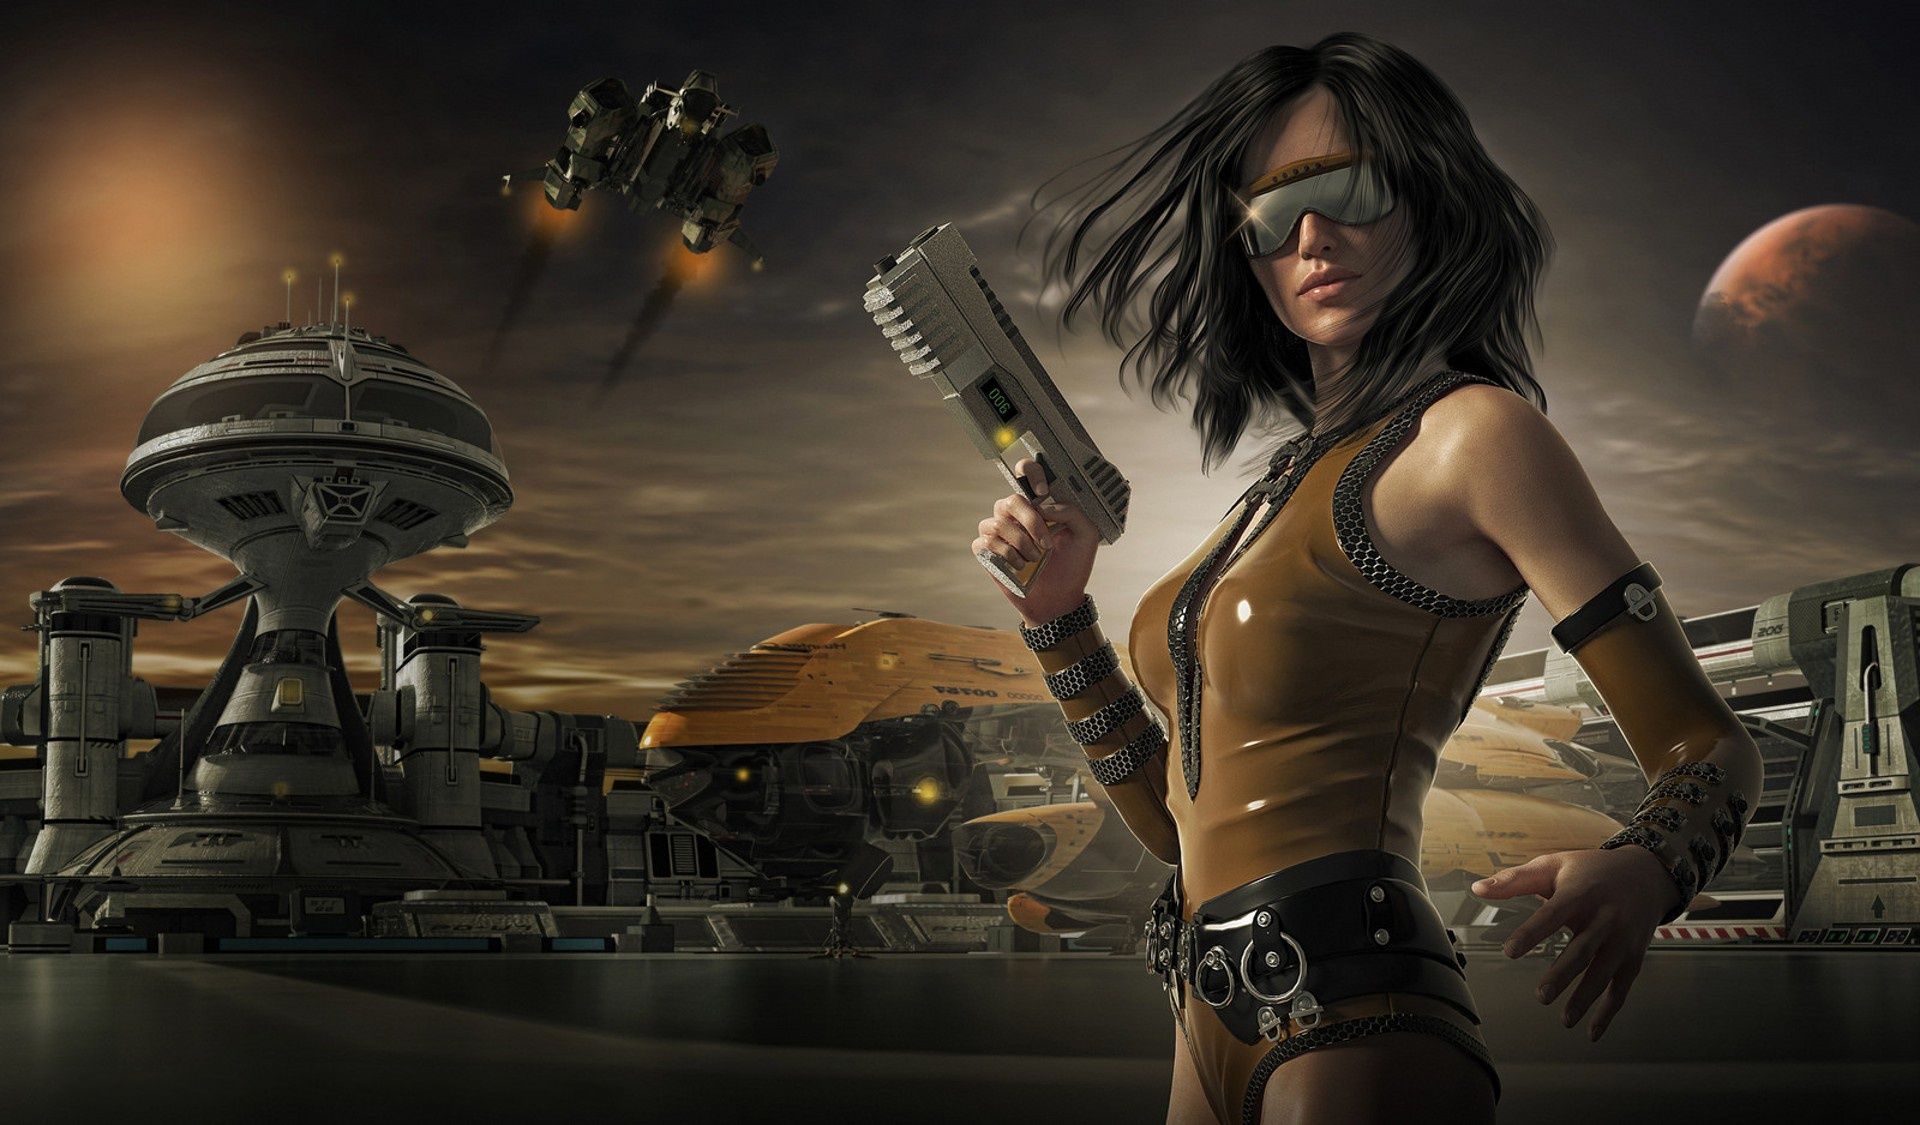 Scifi Sunglasses Woman Warrior With Guns, HD Fantasy Girls, 4k Wallpaper, Image, Background, Photo and Picture